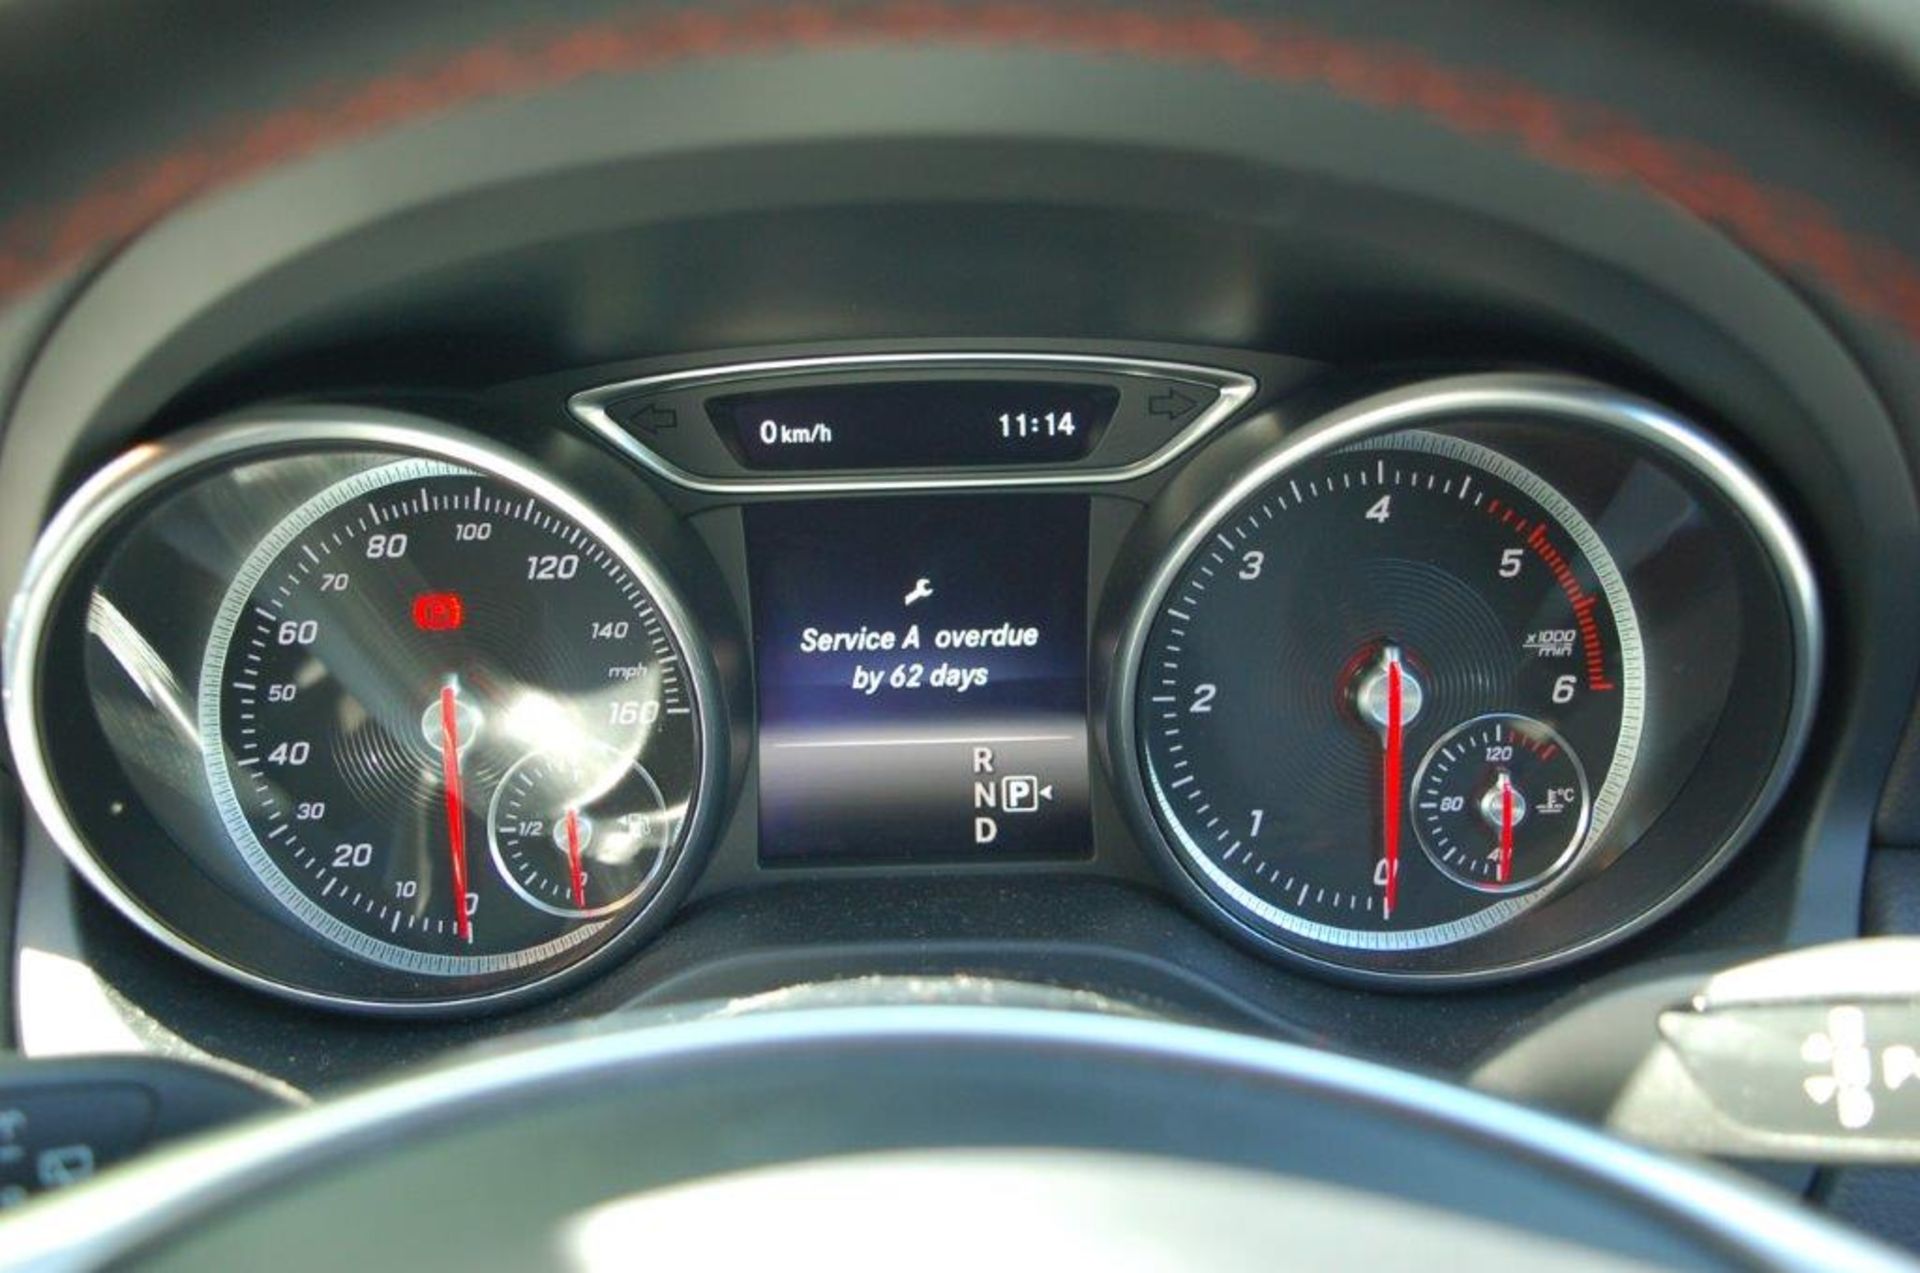 Mercedes Benz CLA 220 D AMG LINE AUTOMATIC DIESEL - Image 5 of 6